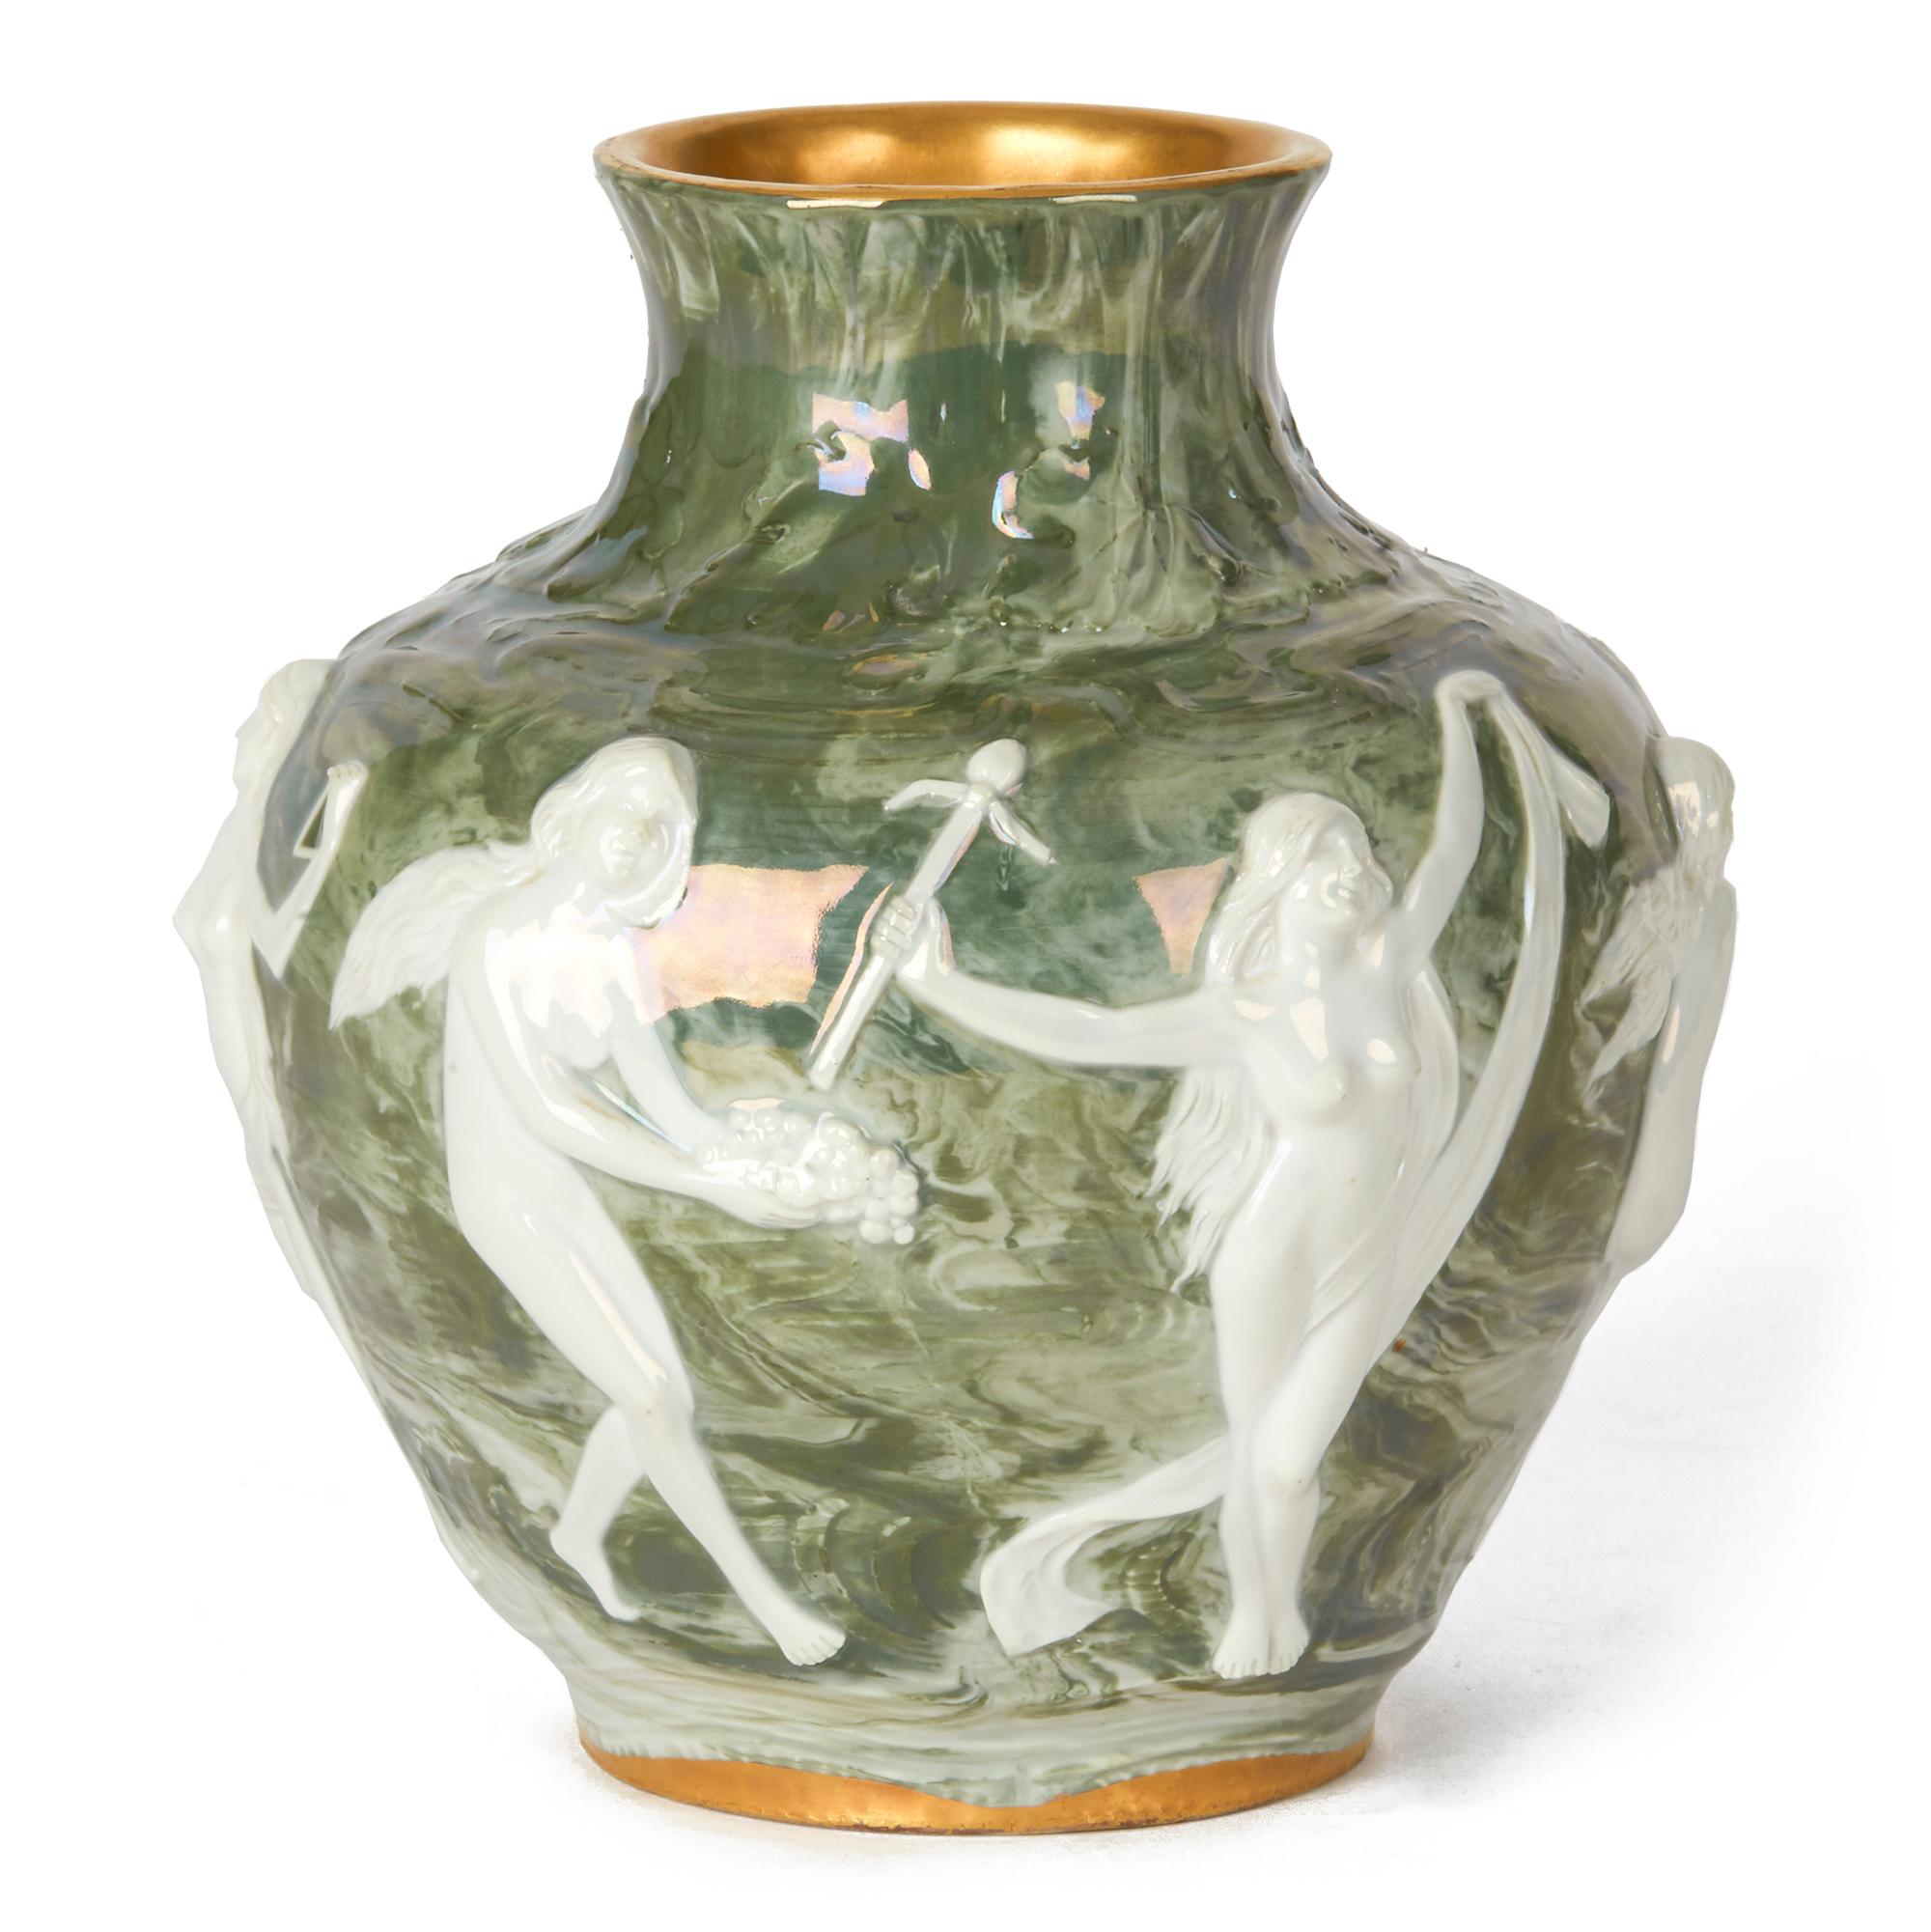 Glazed Adolph Oppel Kronach Art Nouveau Pottery Vase with Maidens, circa 1900 For Sale